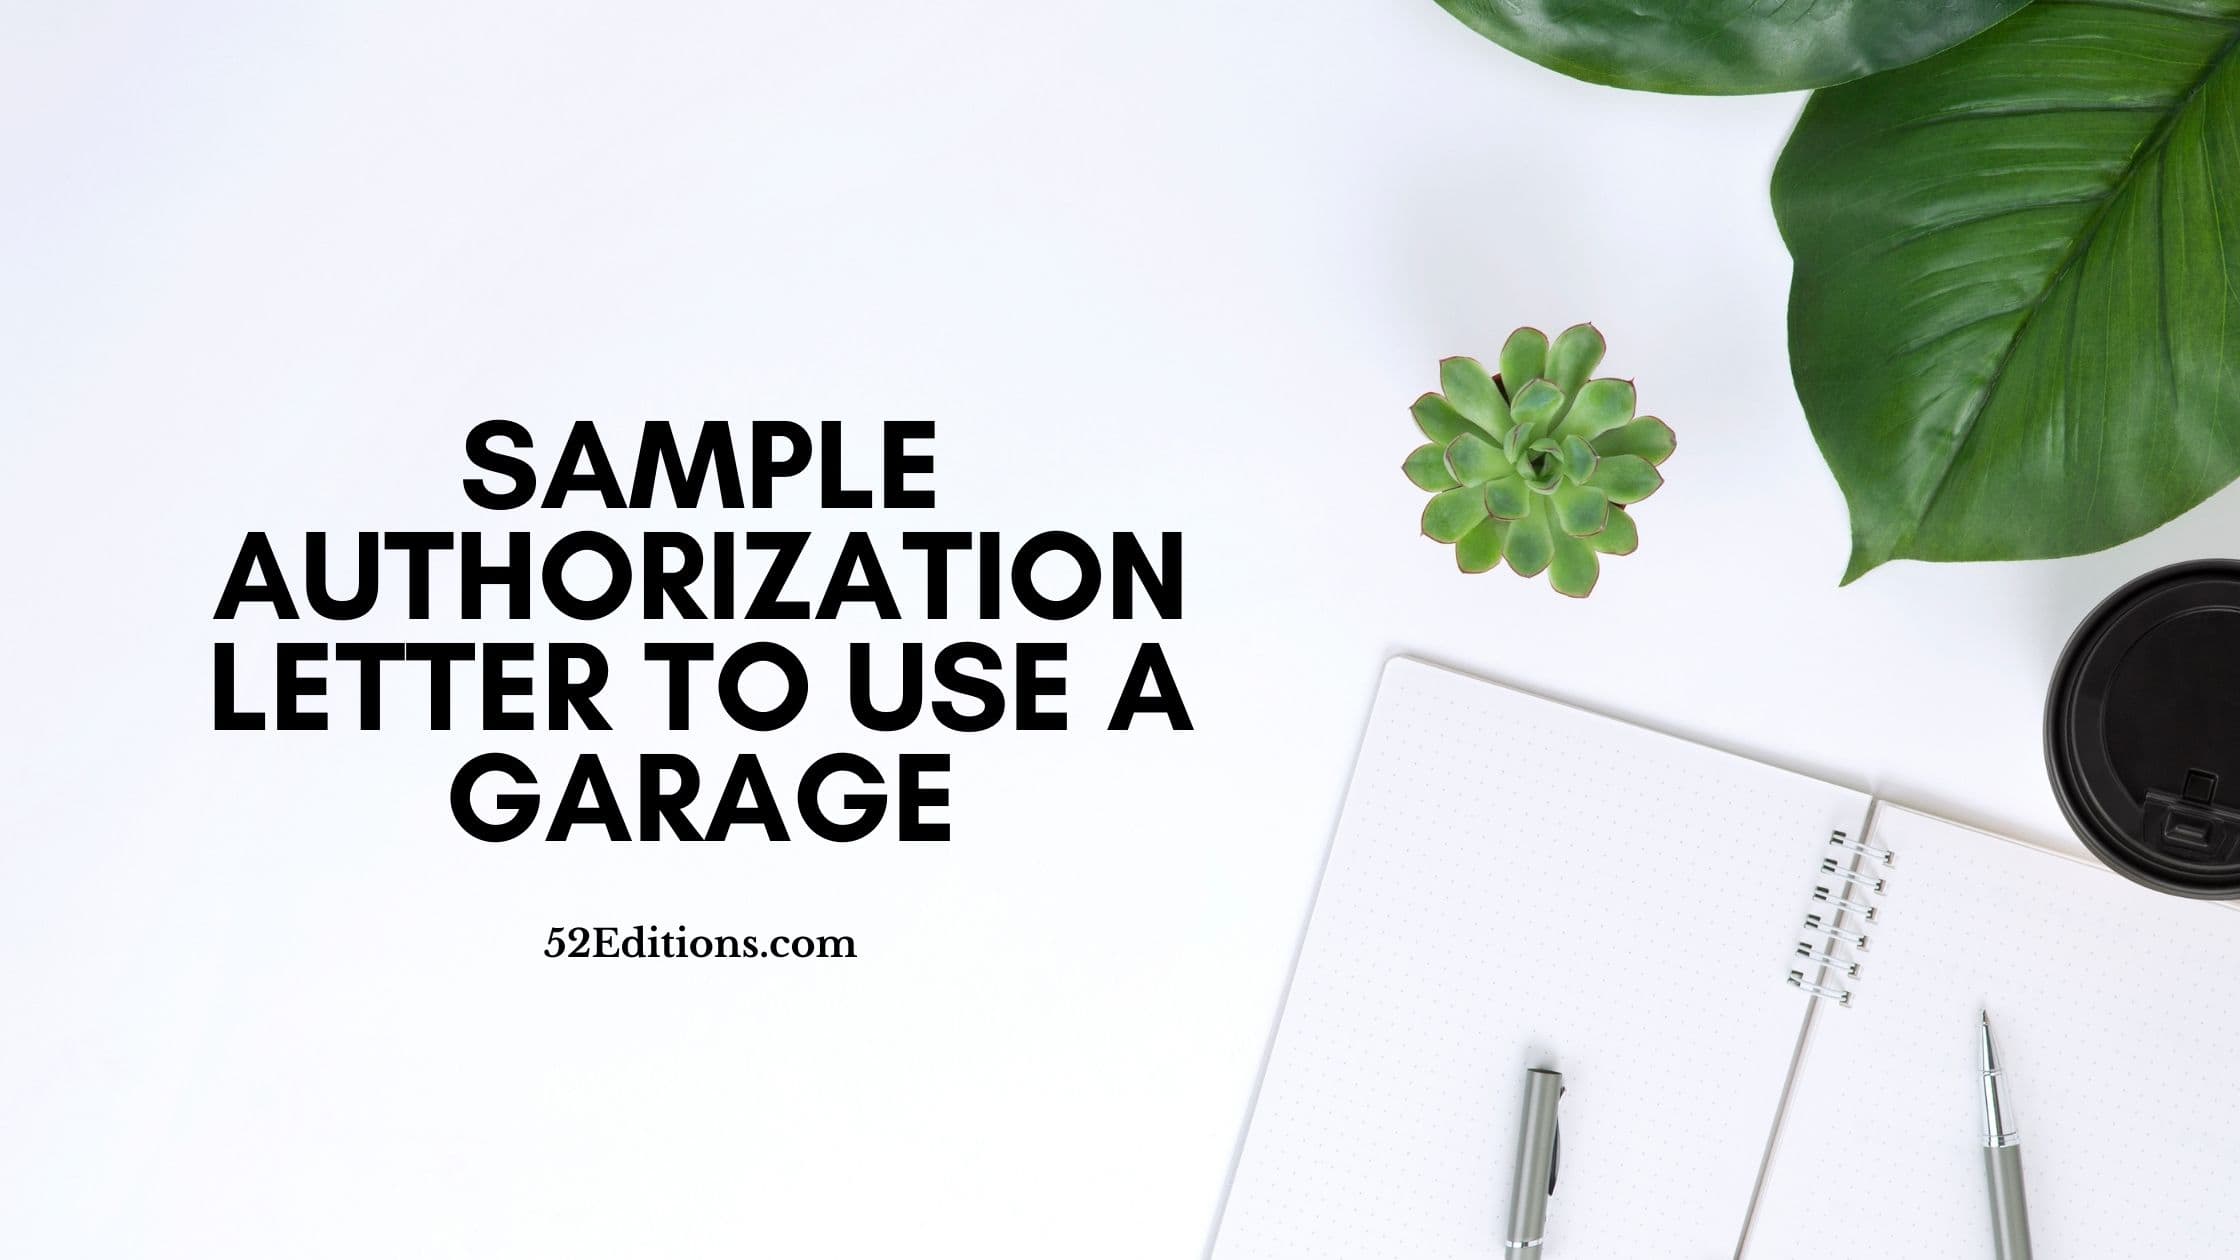 Sample Authorization Letter To Use A Garage // FREE Letter ...